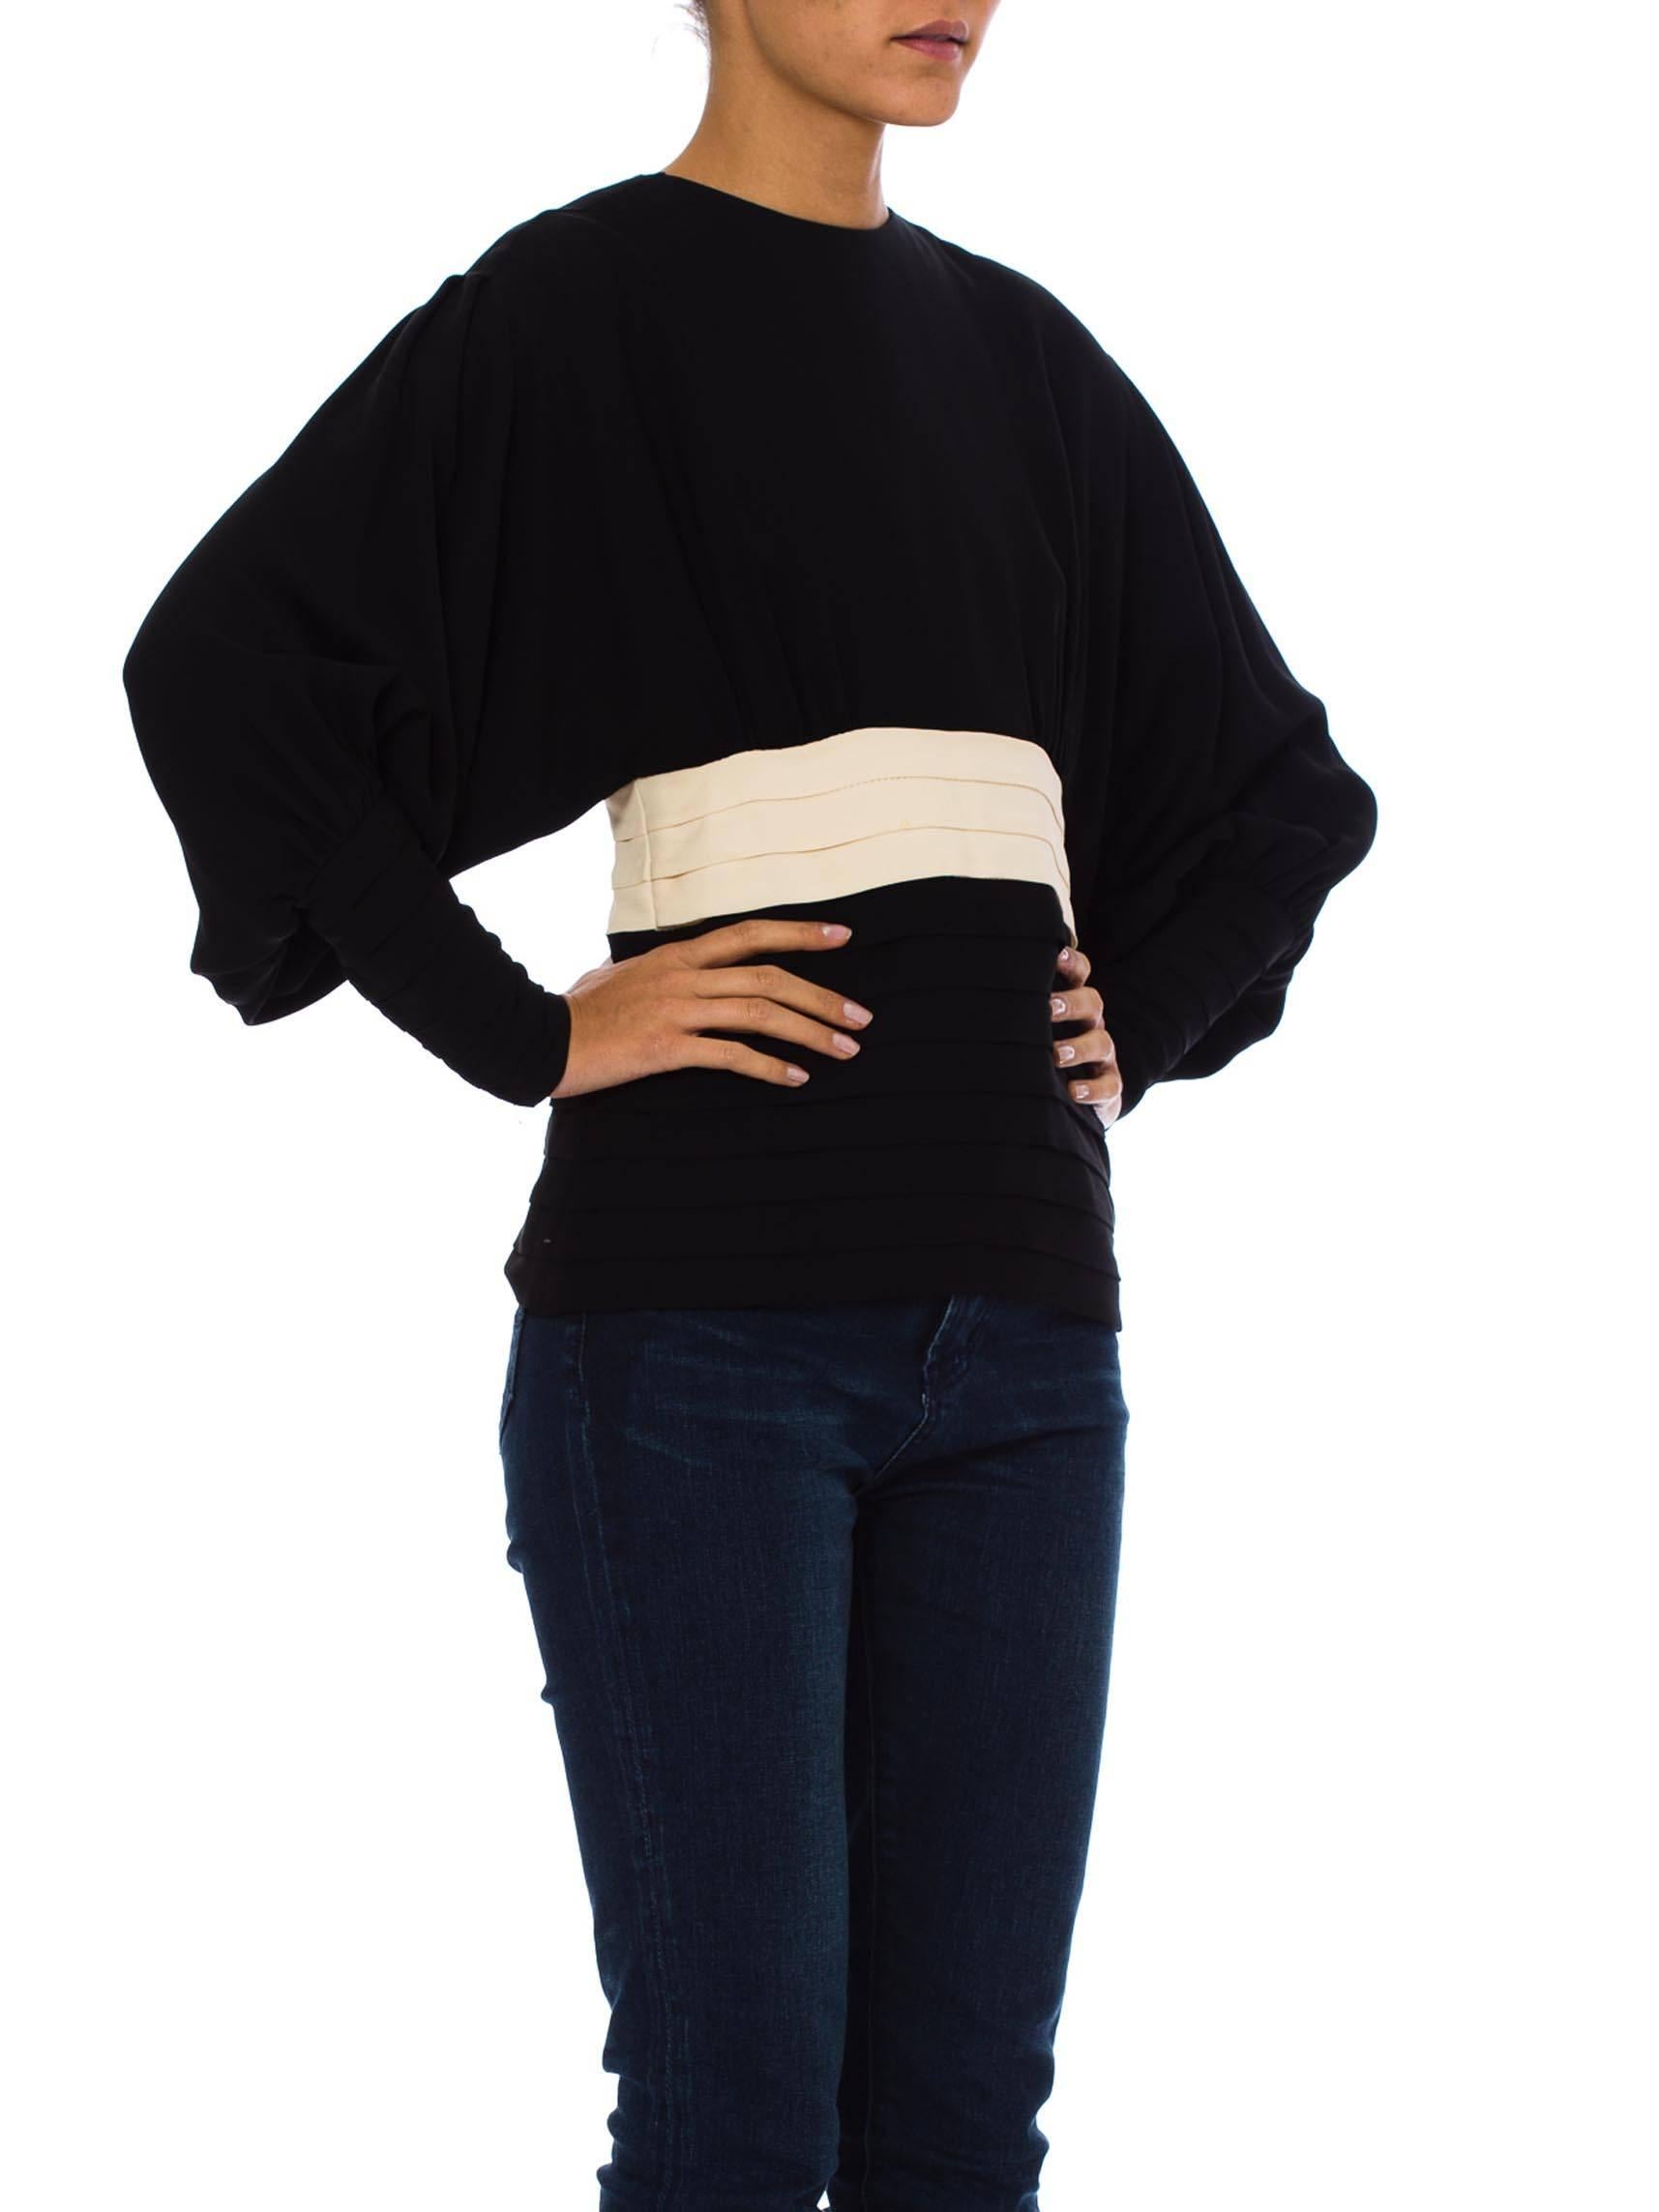 Galanos Black and White Full-Sleeved Top In Good Condition In New York, NY